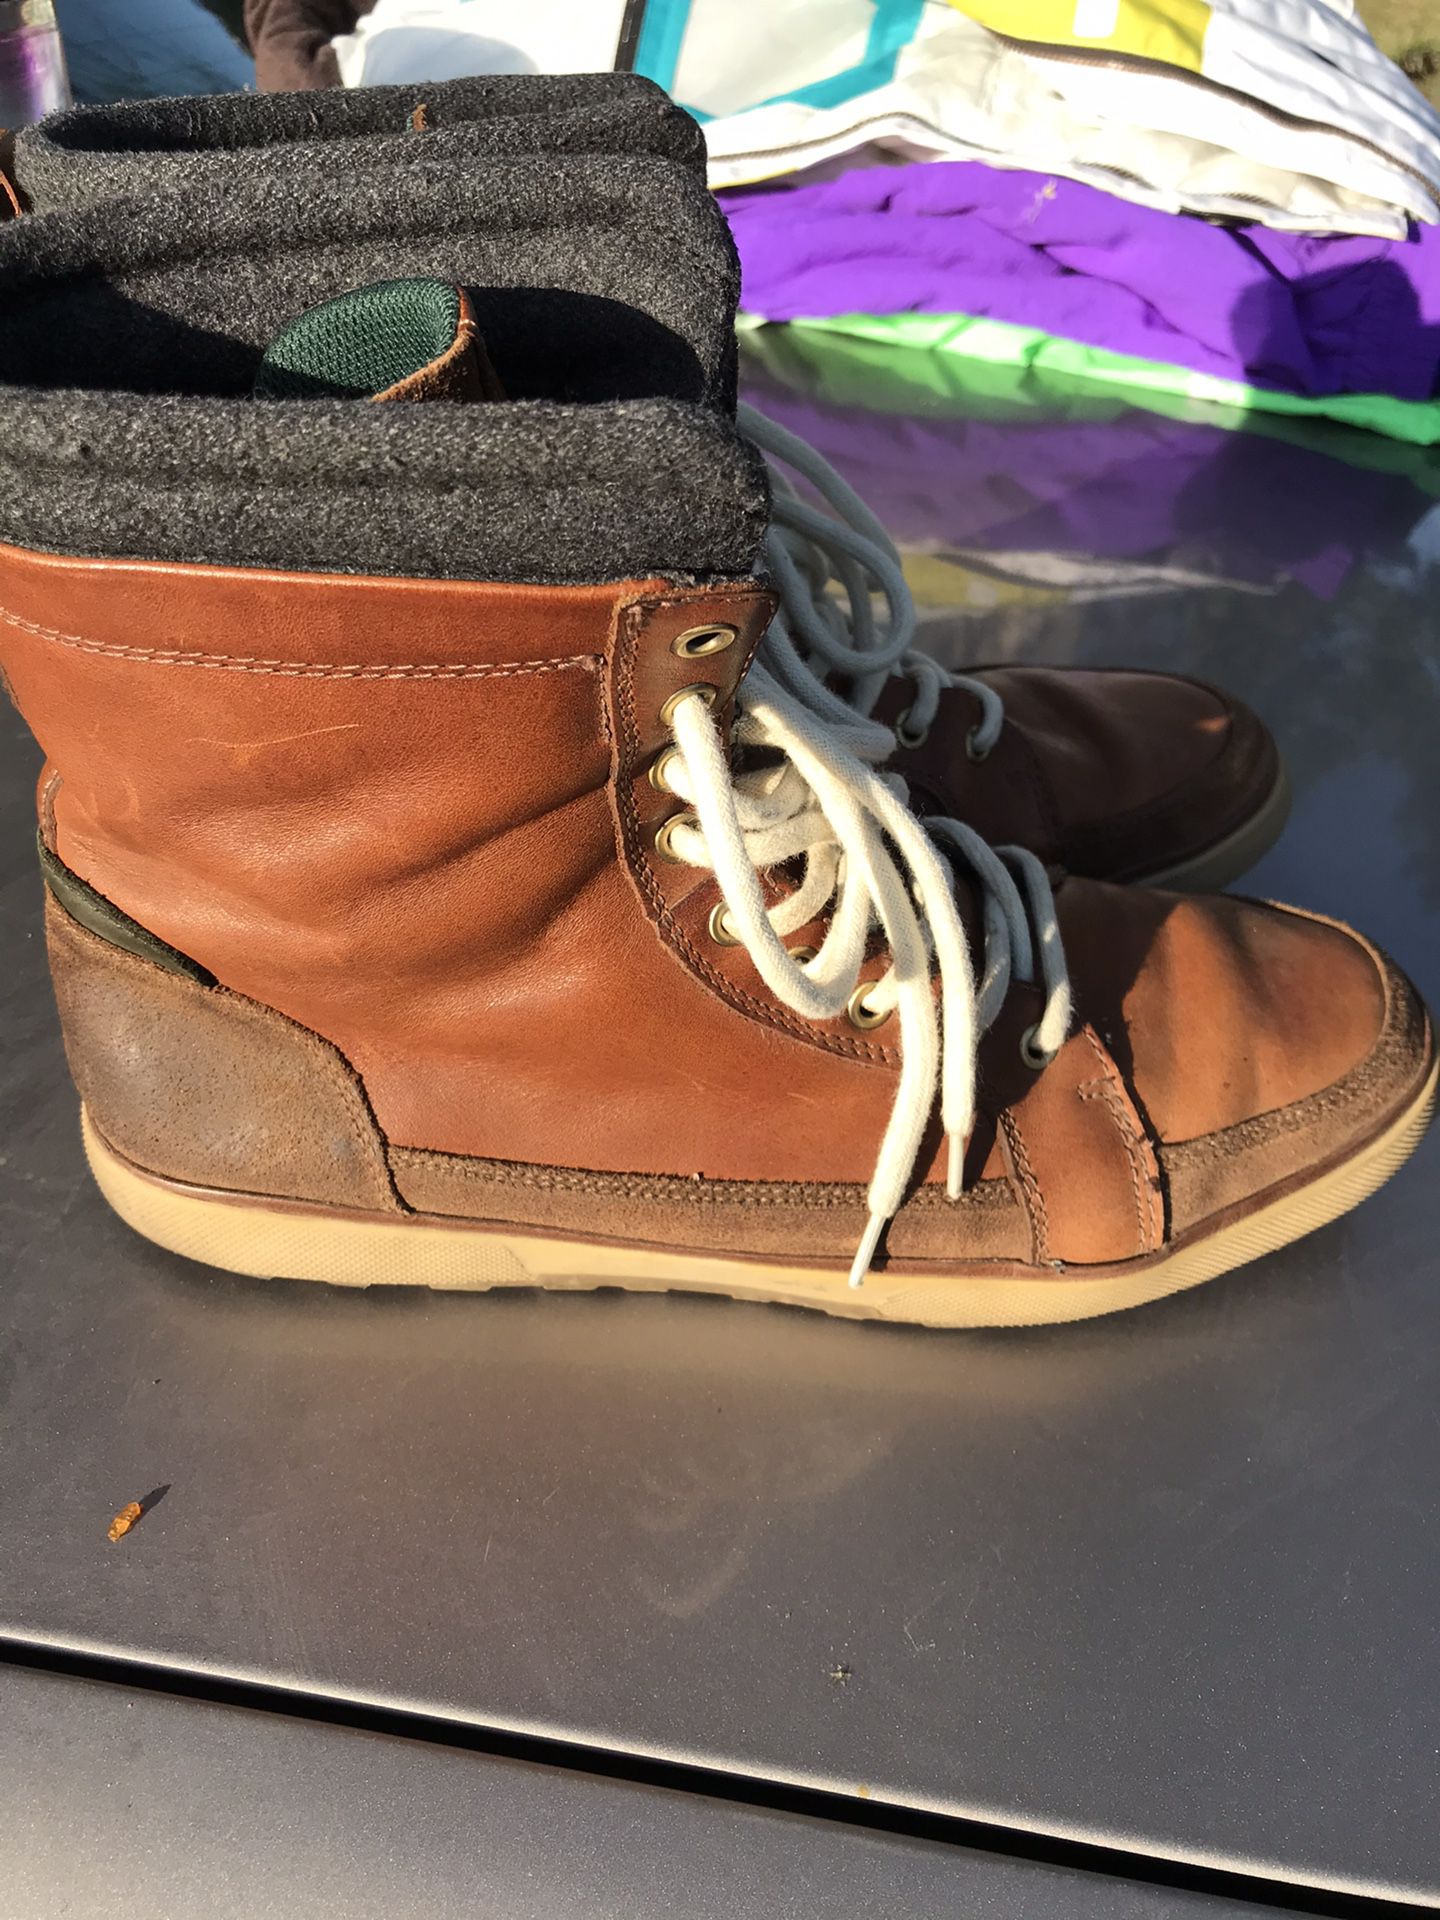 !! Boots by Aldo Size 11 for in San CA -